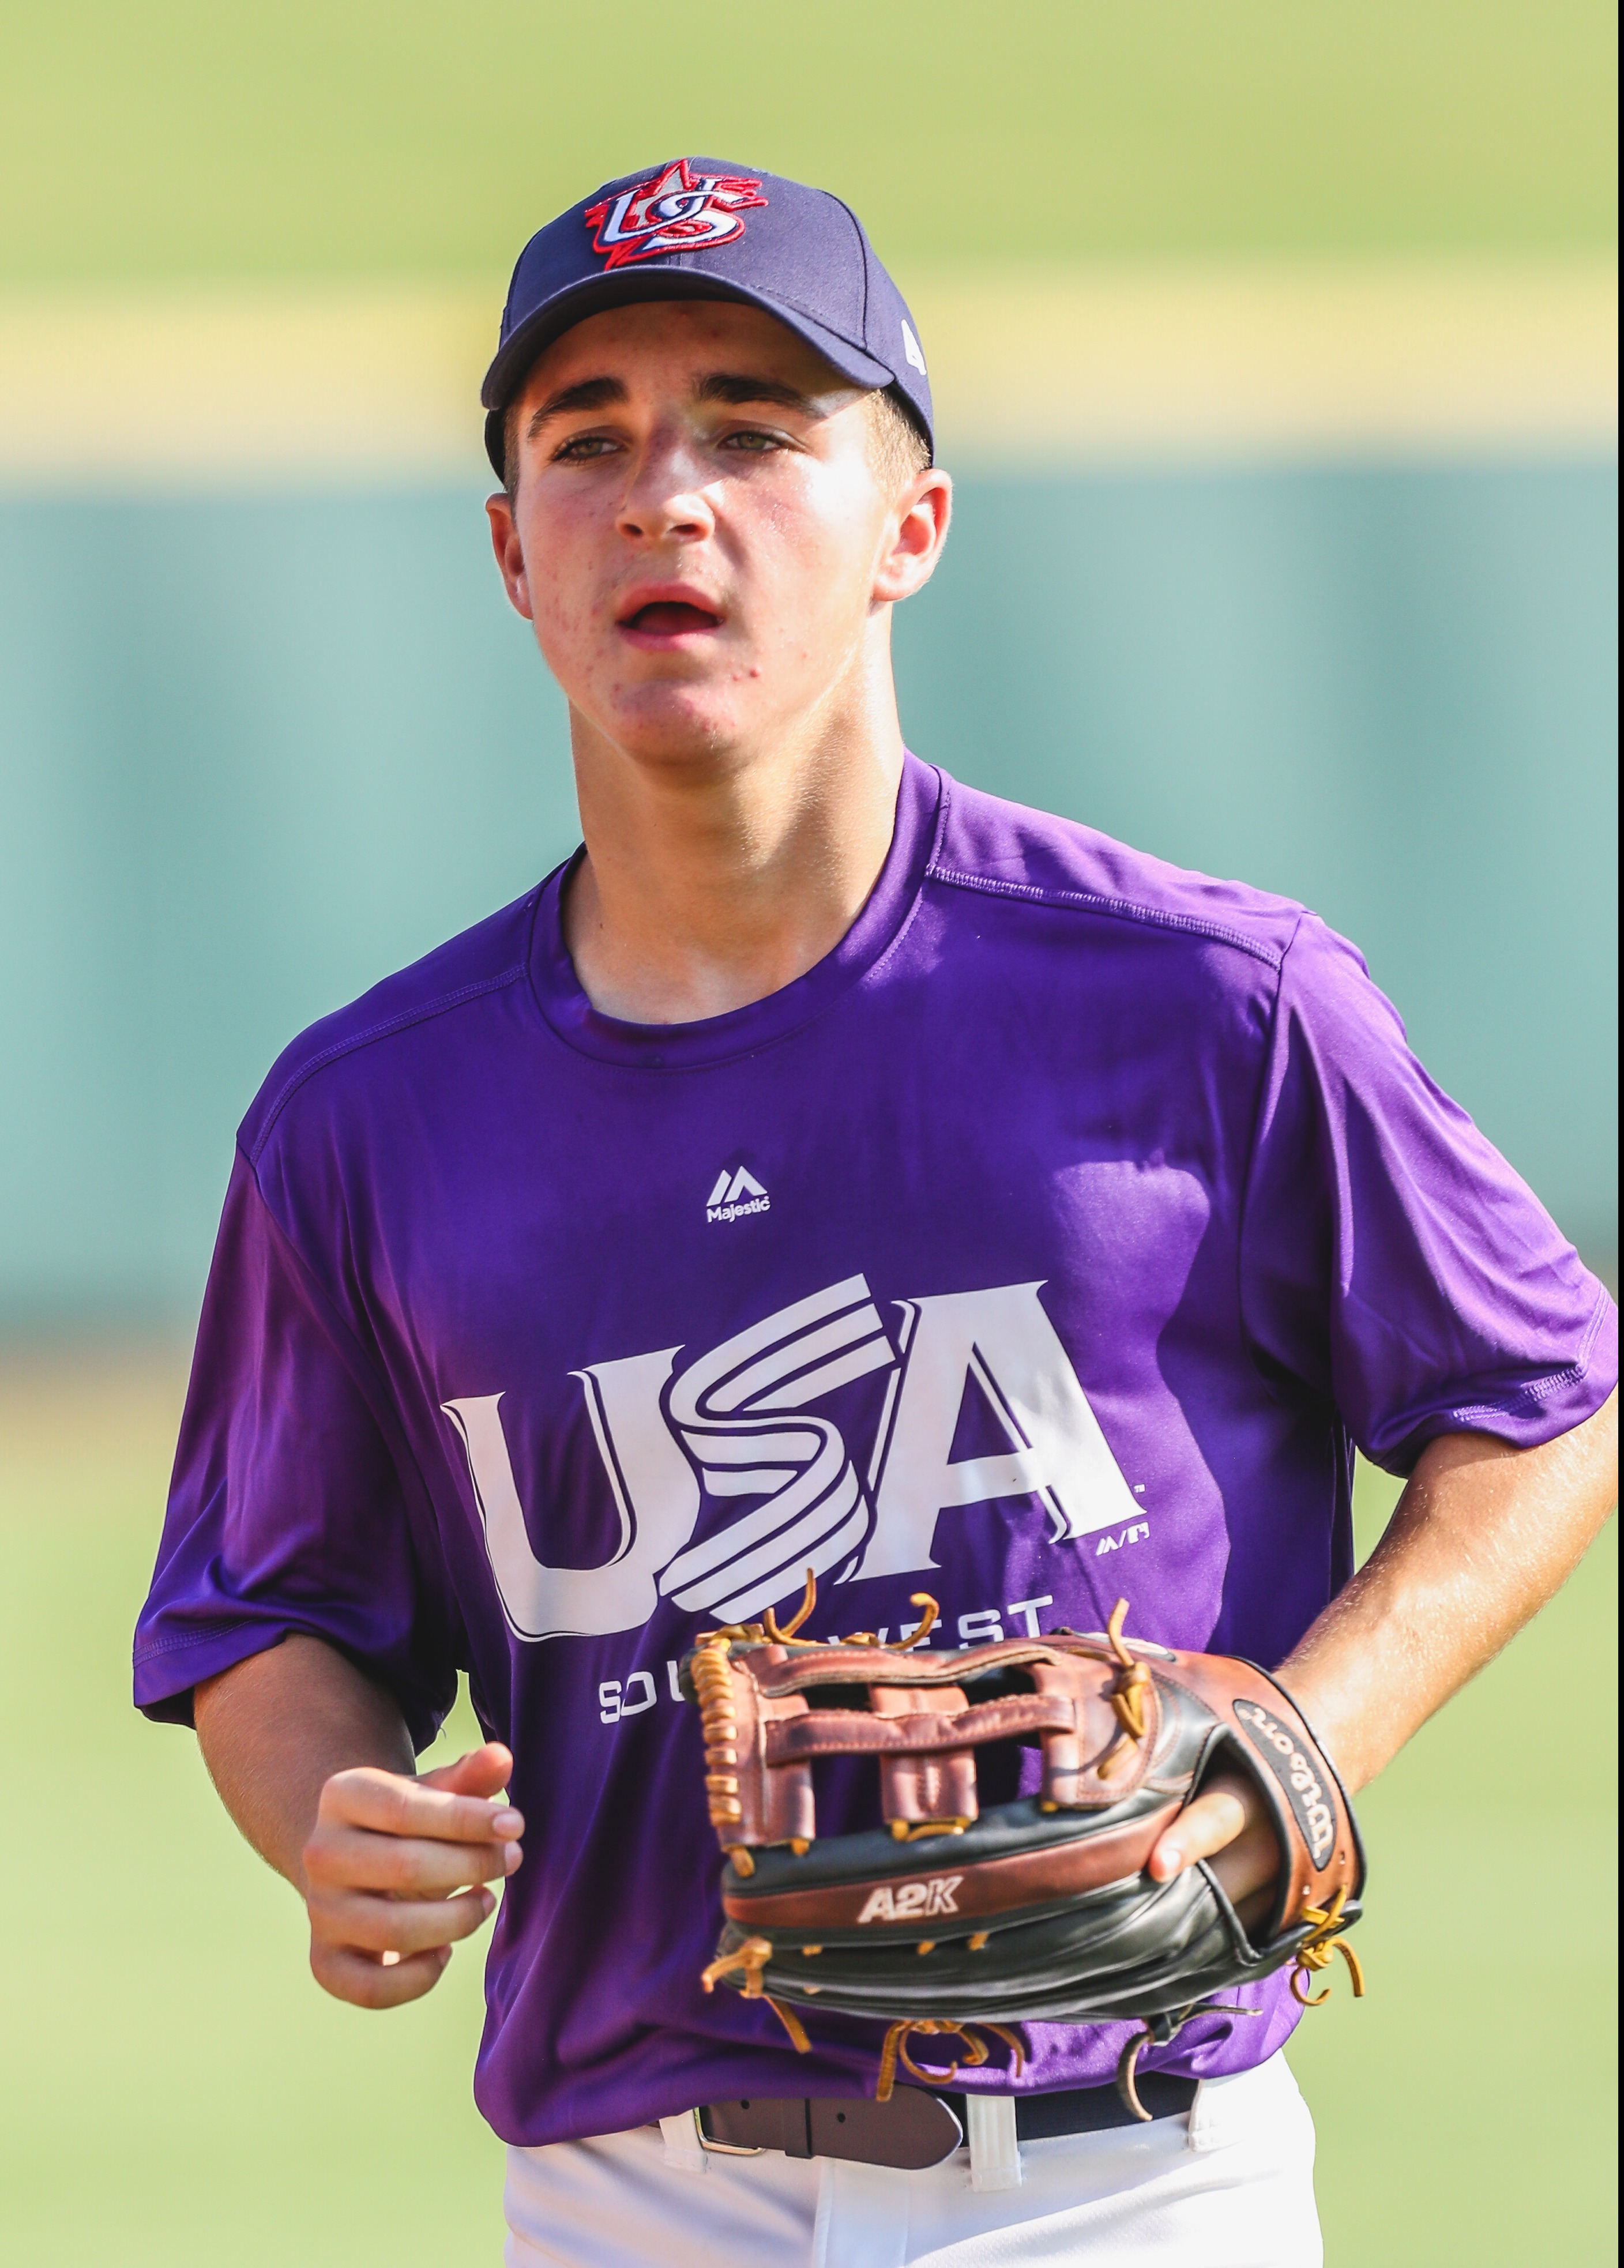 Contact Ethan Hott the baseball player from Arizona at College Athlete Advantage platform